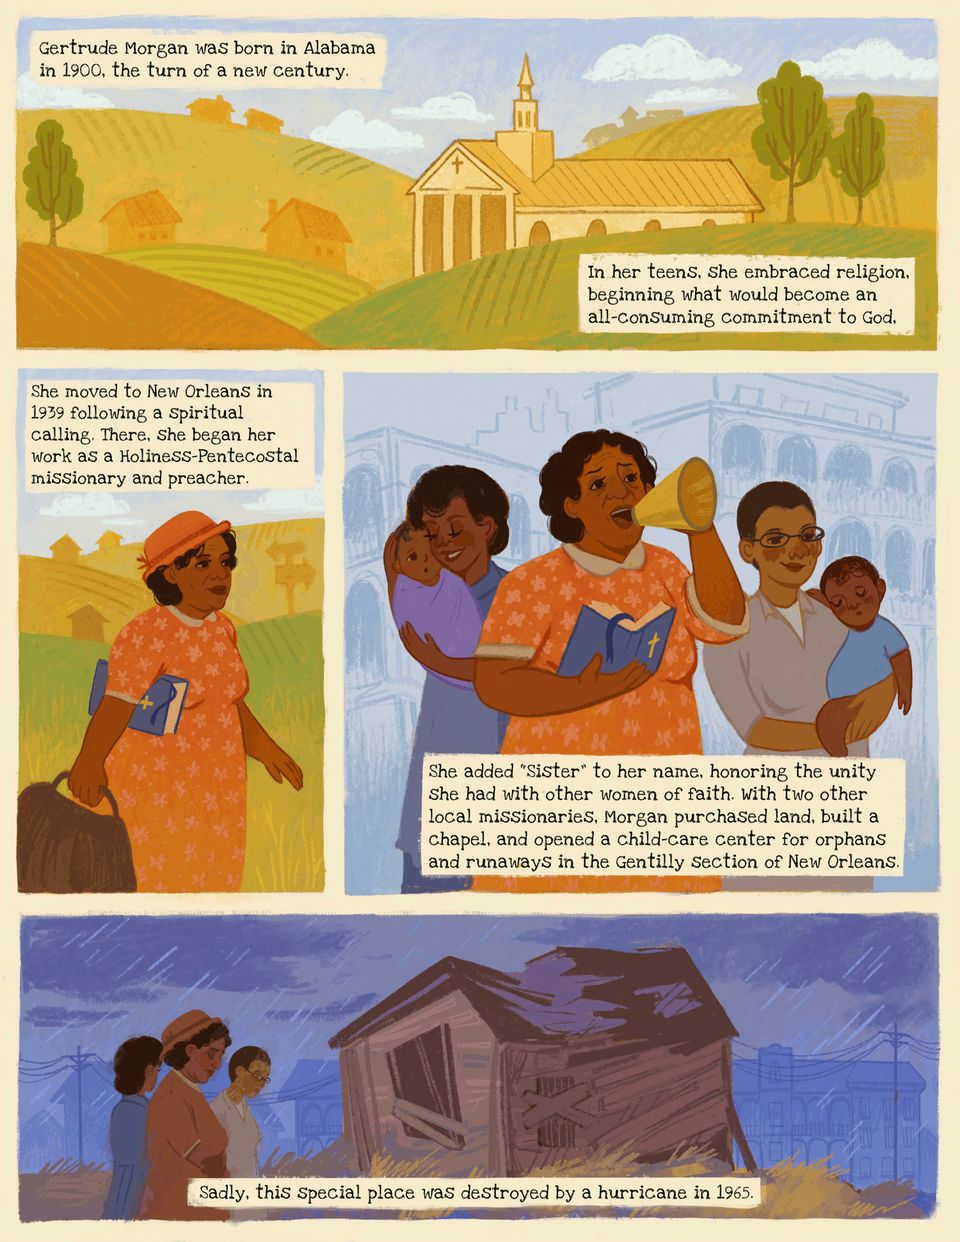 Illustrations and written text show Sister Gertrudes journey to follow her spiritual calling, leading her from Alabama to New Orleans. 